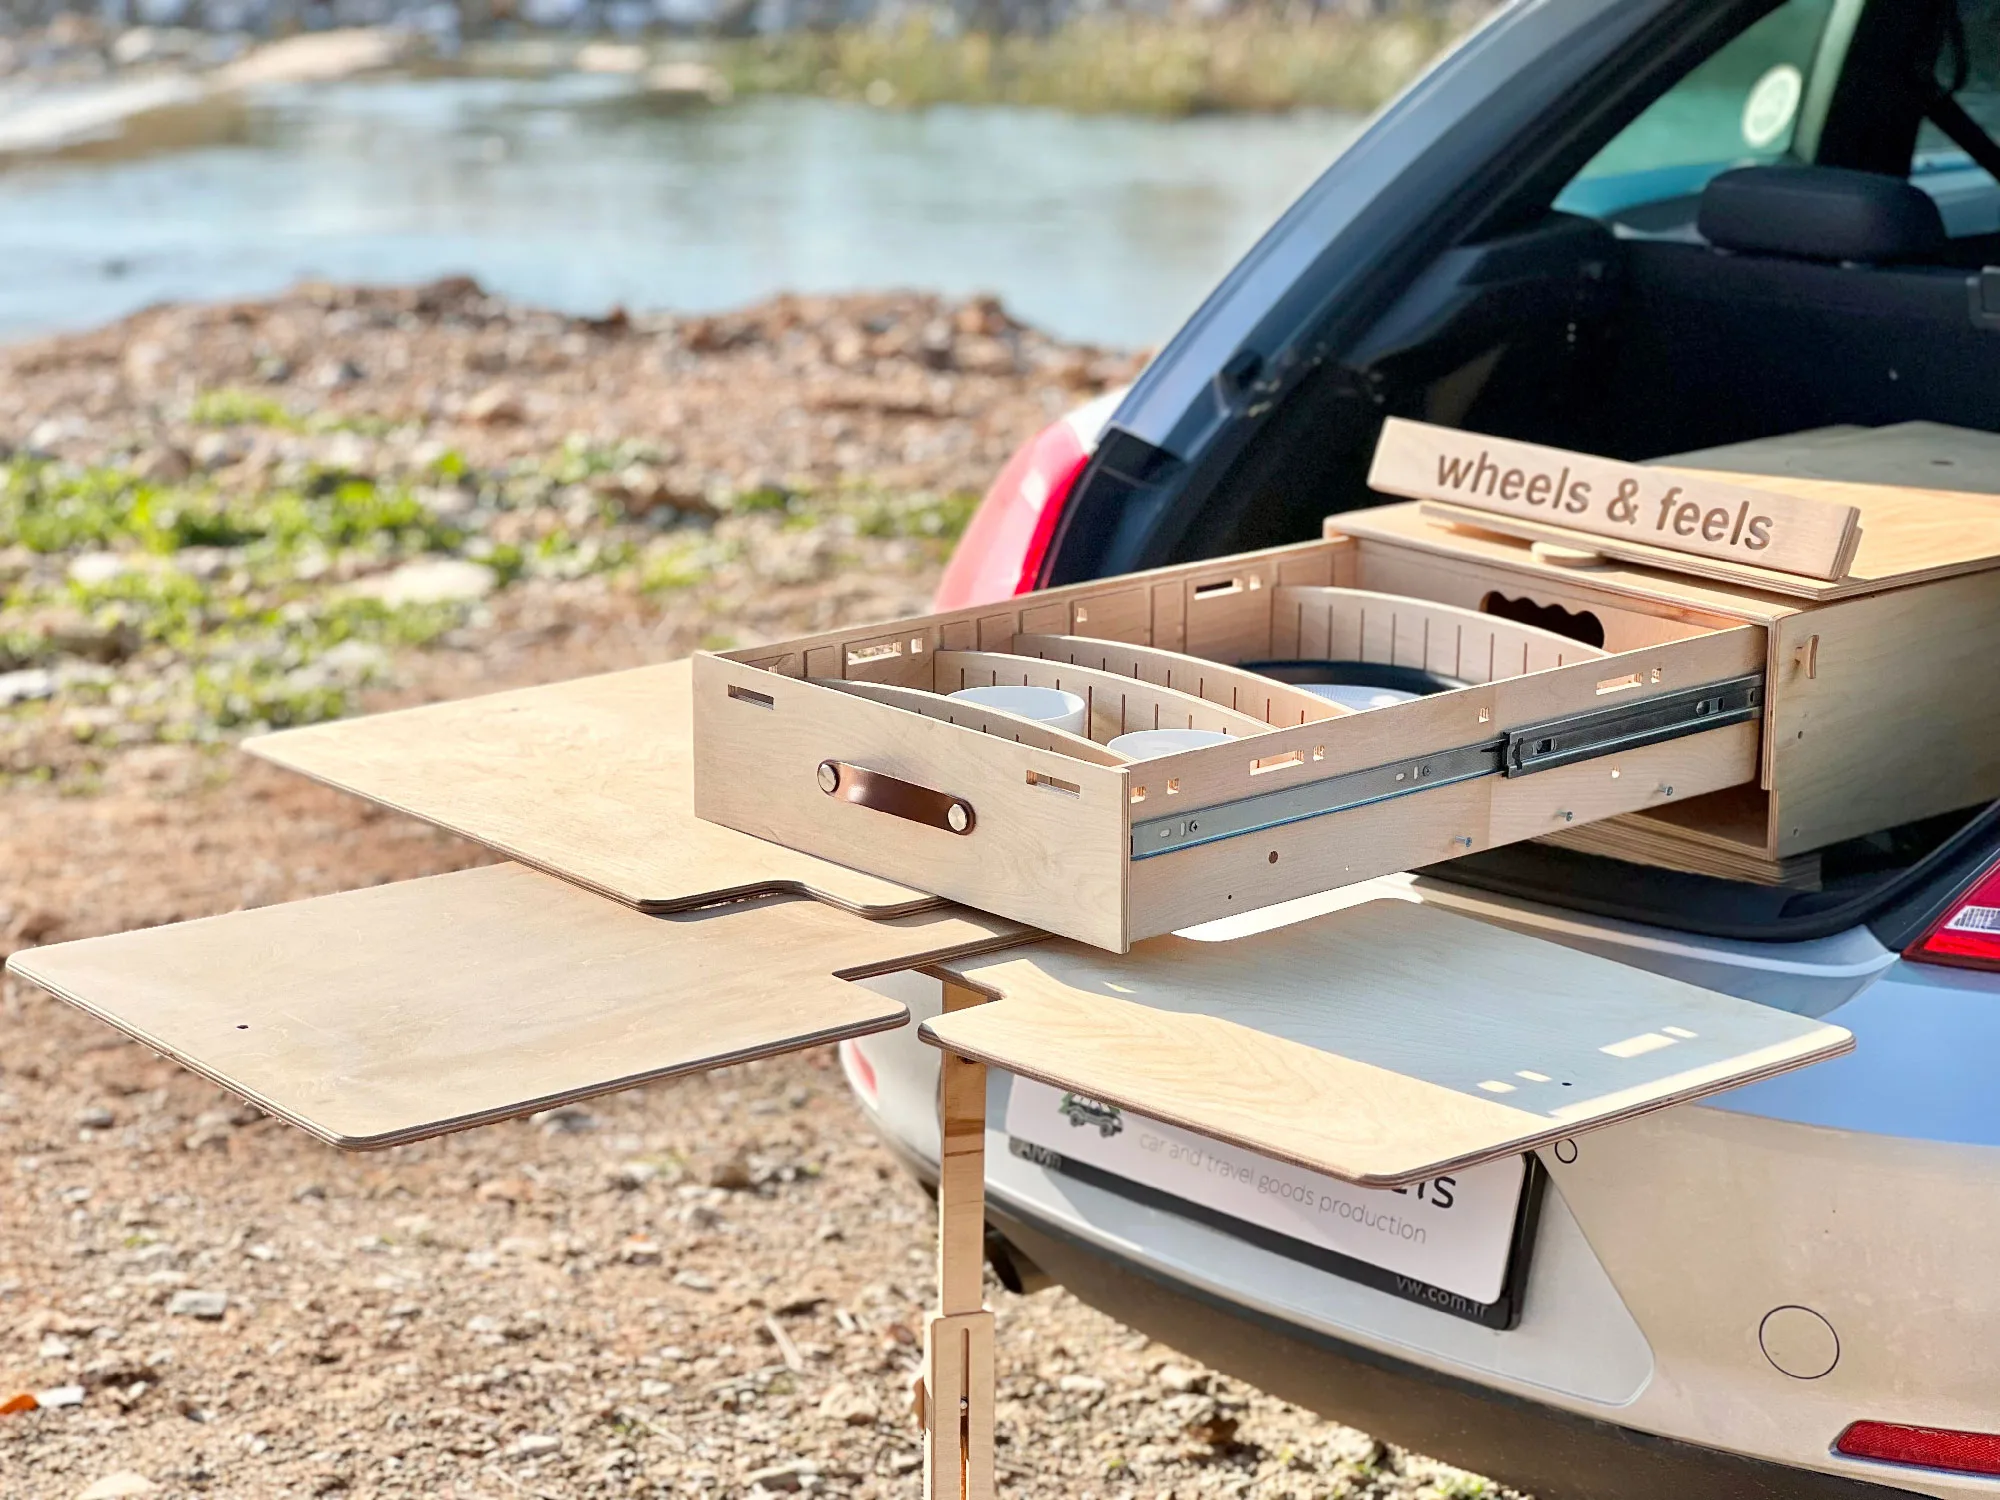 Revolutionize your camping food ideas with car kitchen